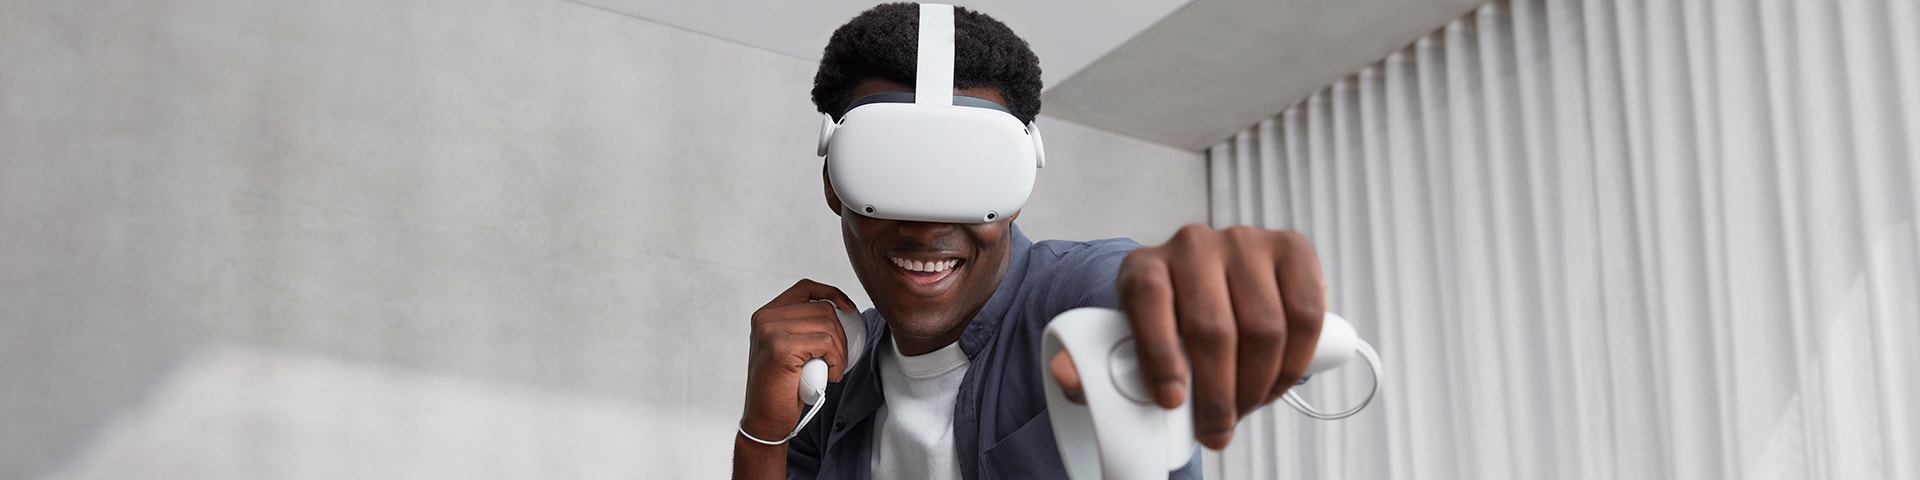 Oculus Quest 2 with VirtuClear Lens Inserts in Action